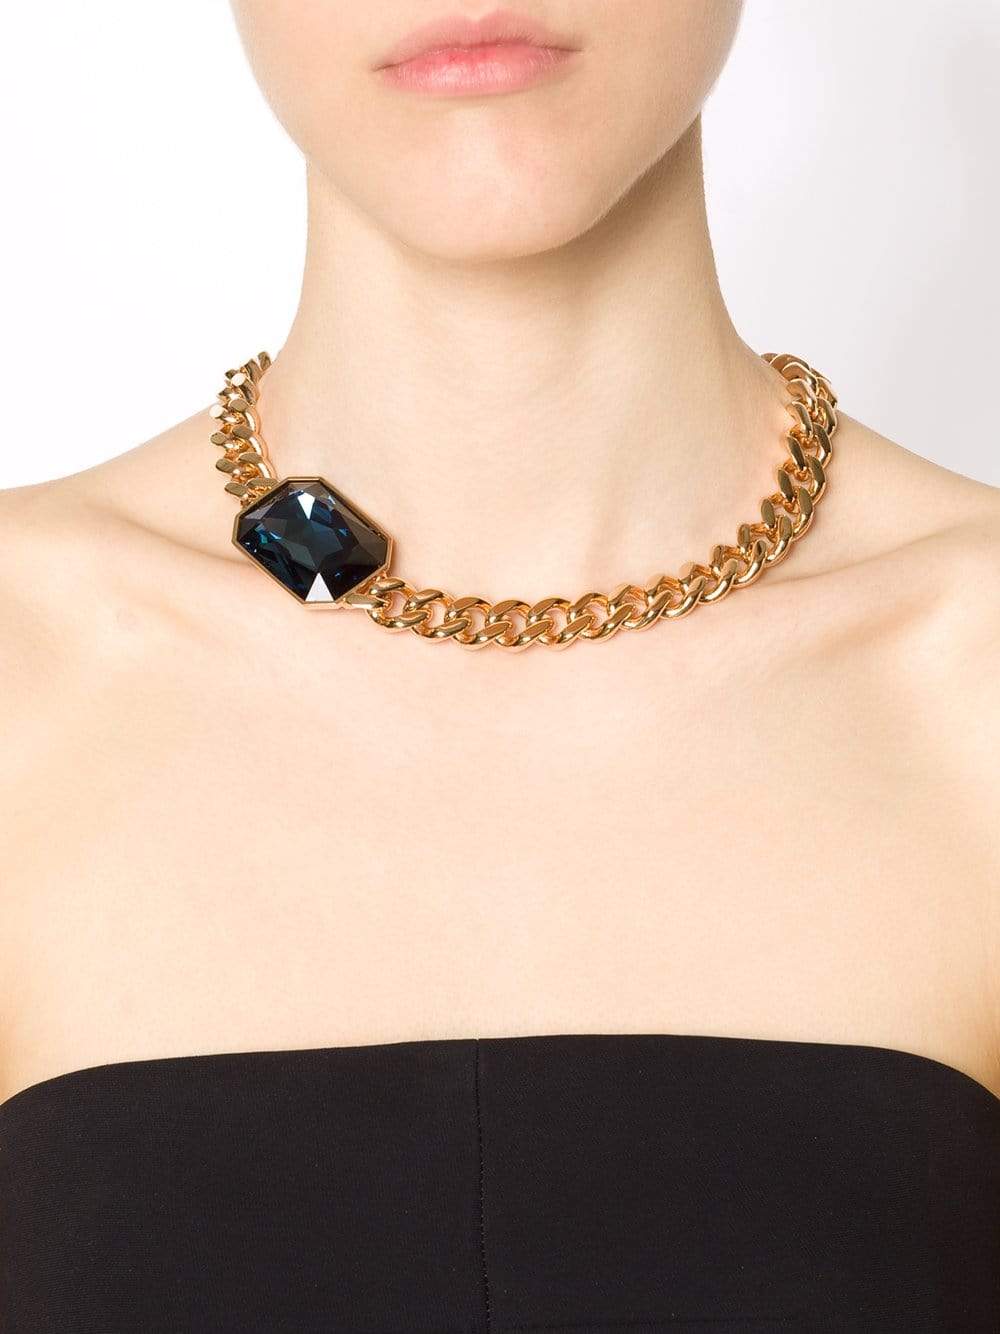 Short Choker With Stone JEWELRYBOUTIQUENECKLACE O REBECCA   